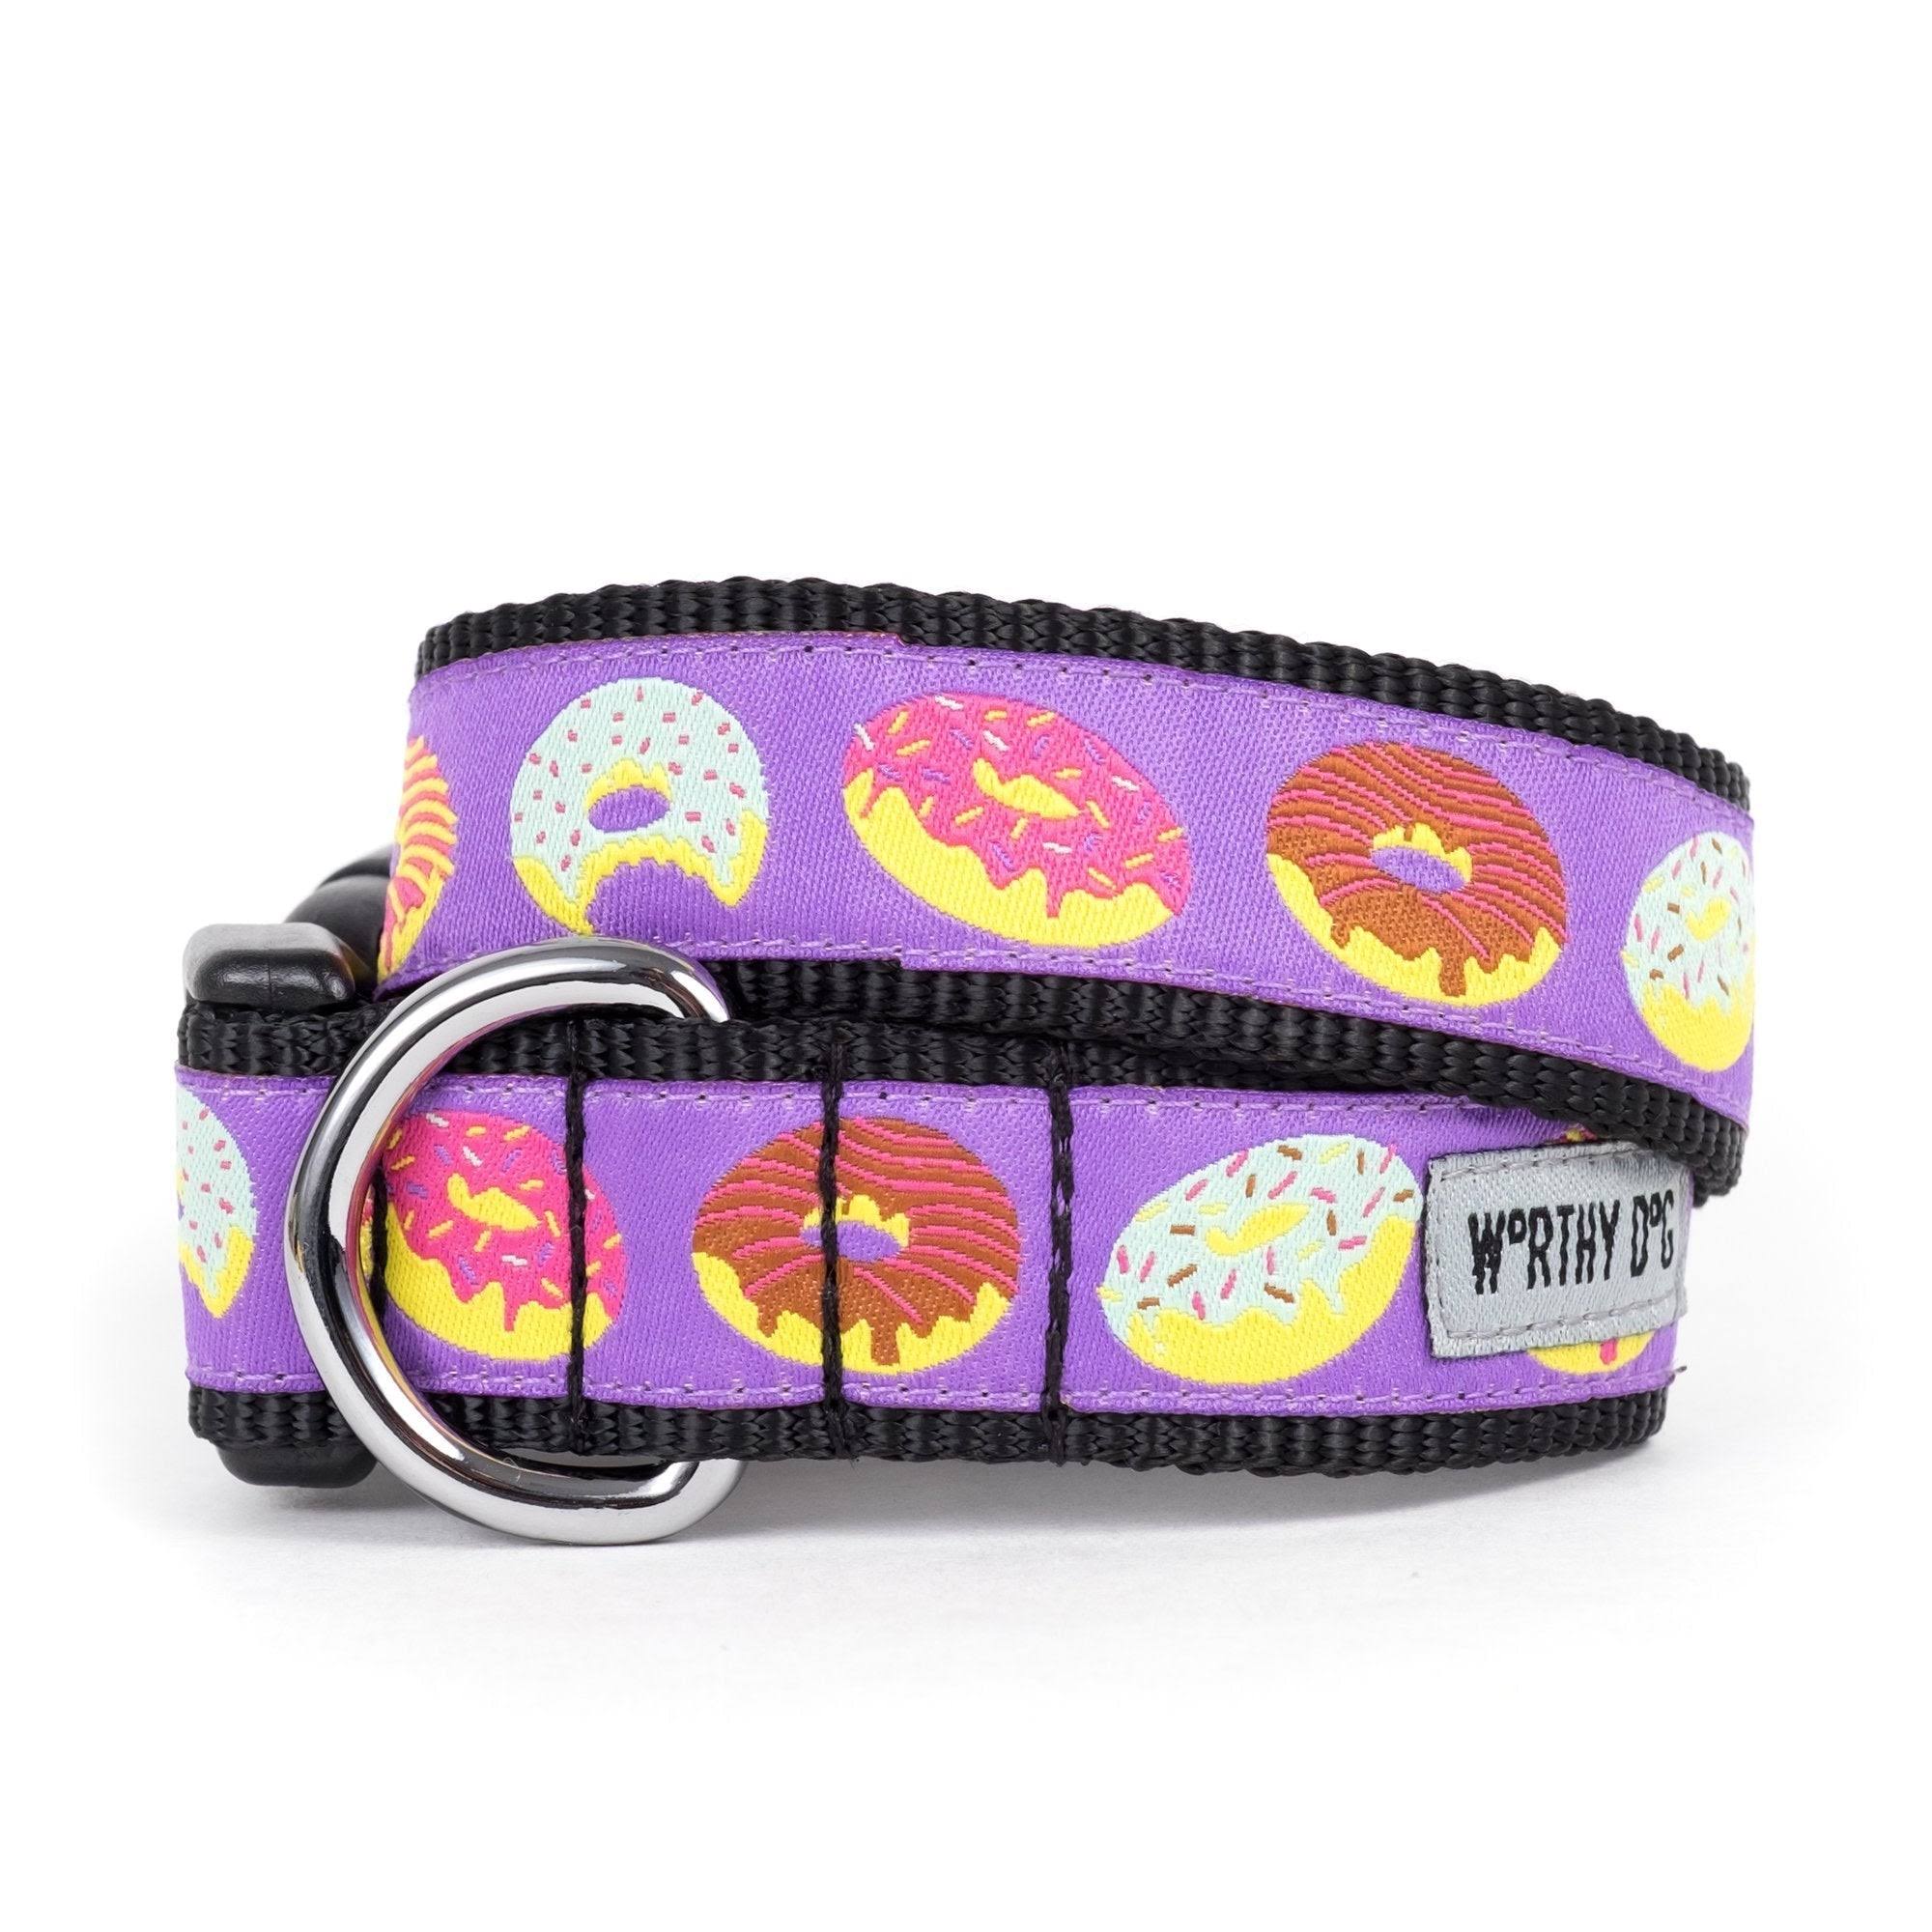 The Worthy Dog Donuts Designer Adjustable and Comfortable Nylon Webbing, Side Release Buckle Collar for Dogs - Fits Small, Medium and Large Dogs,